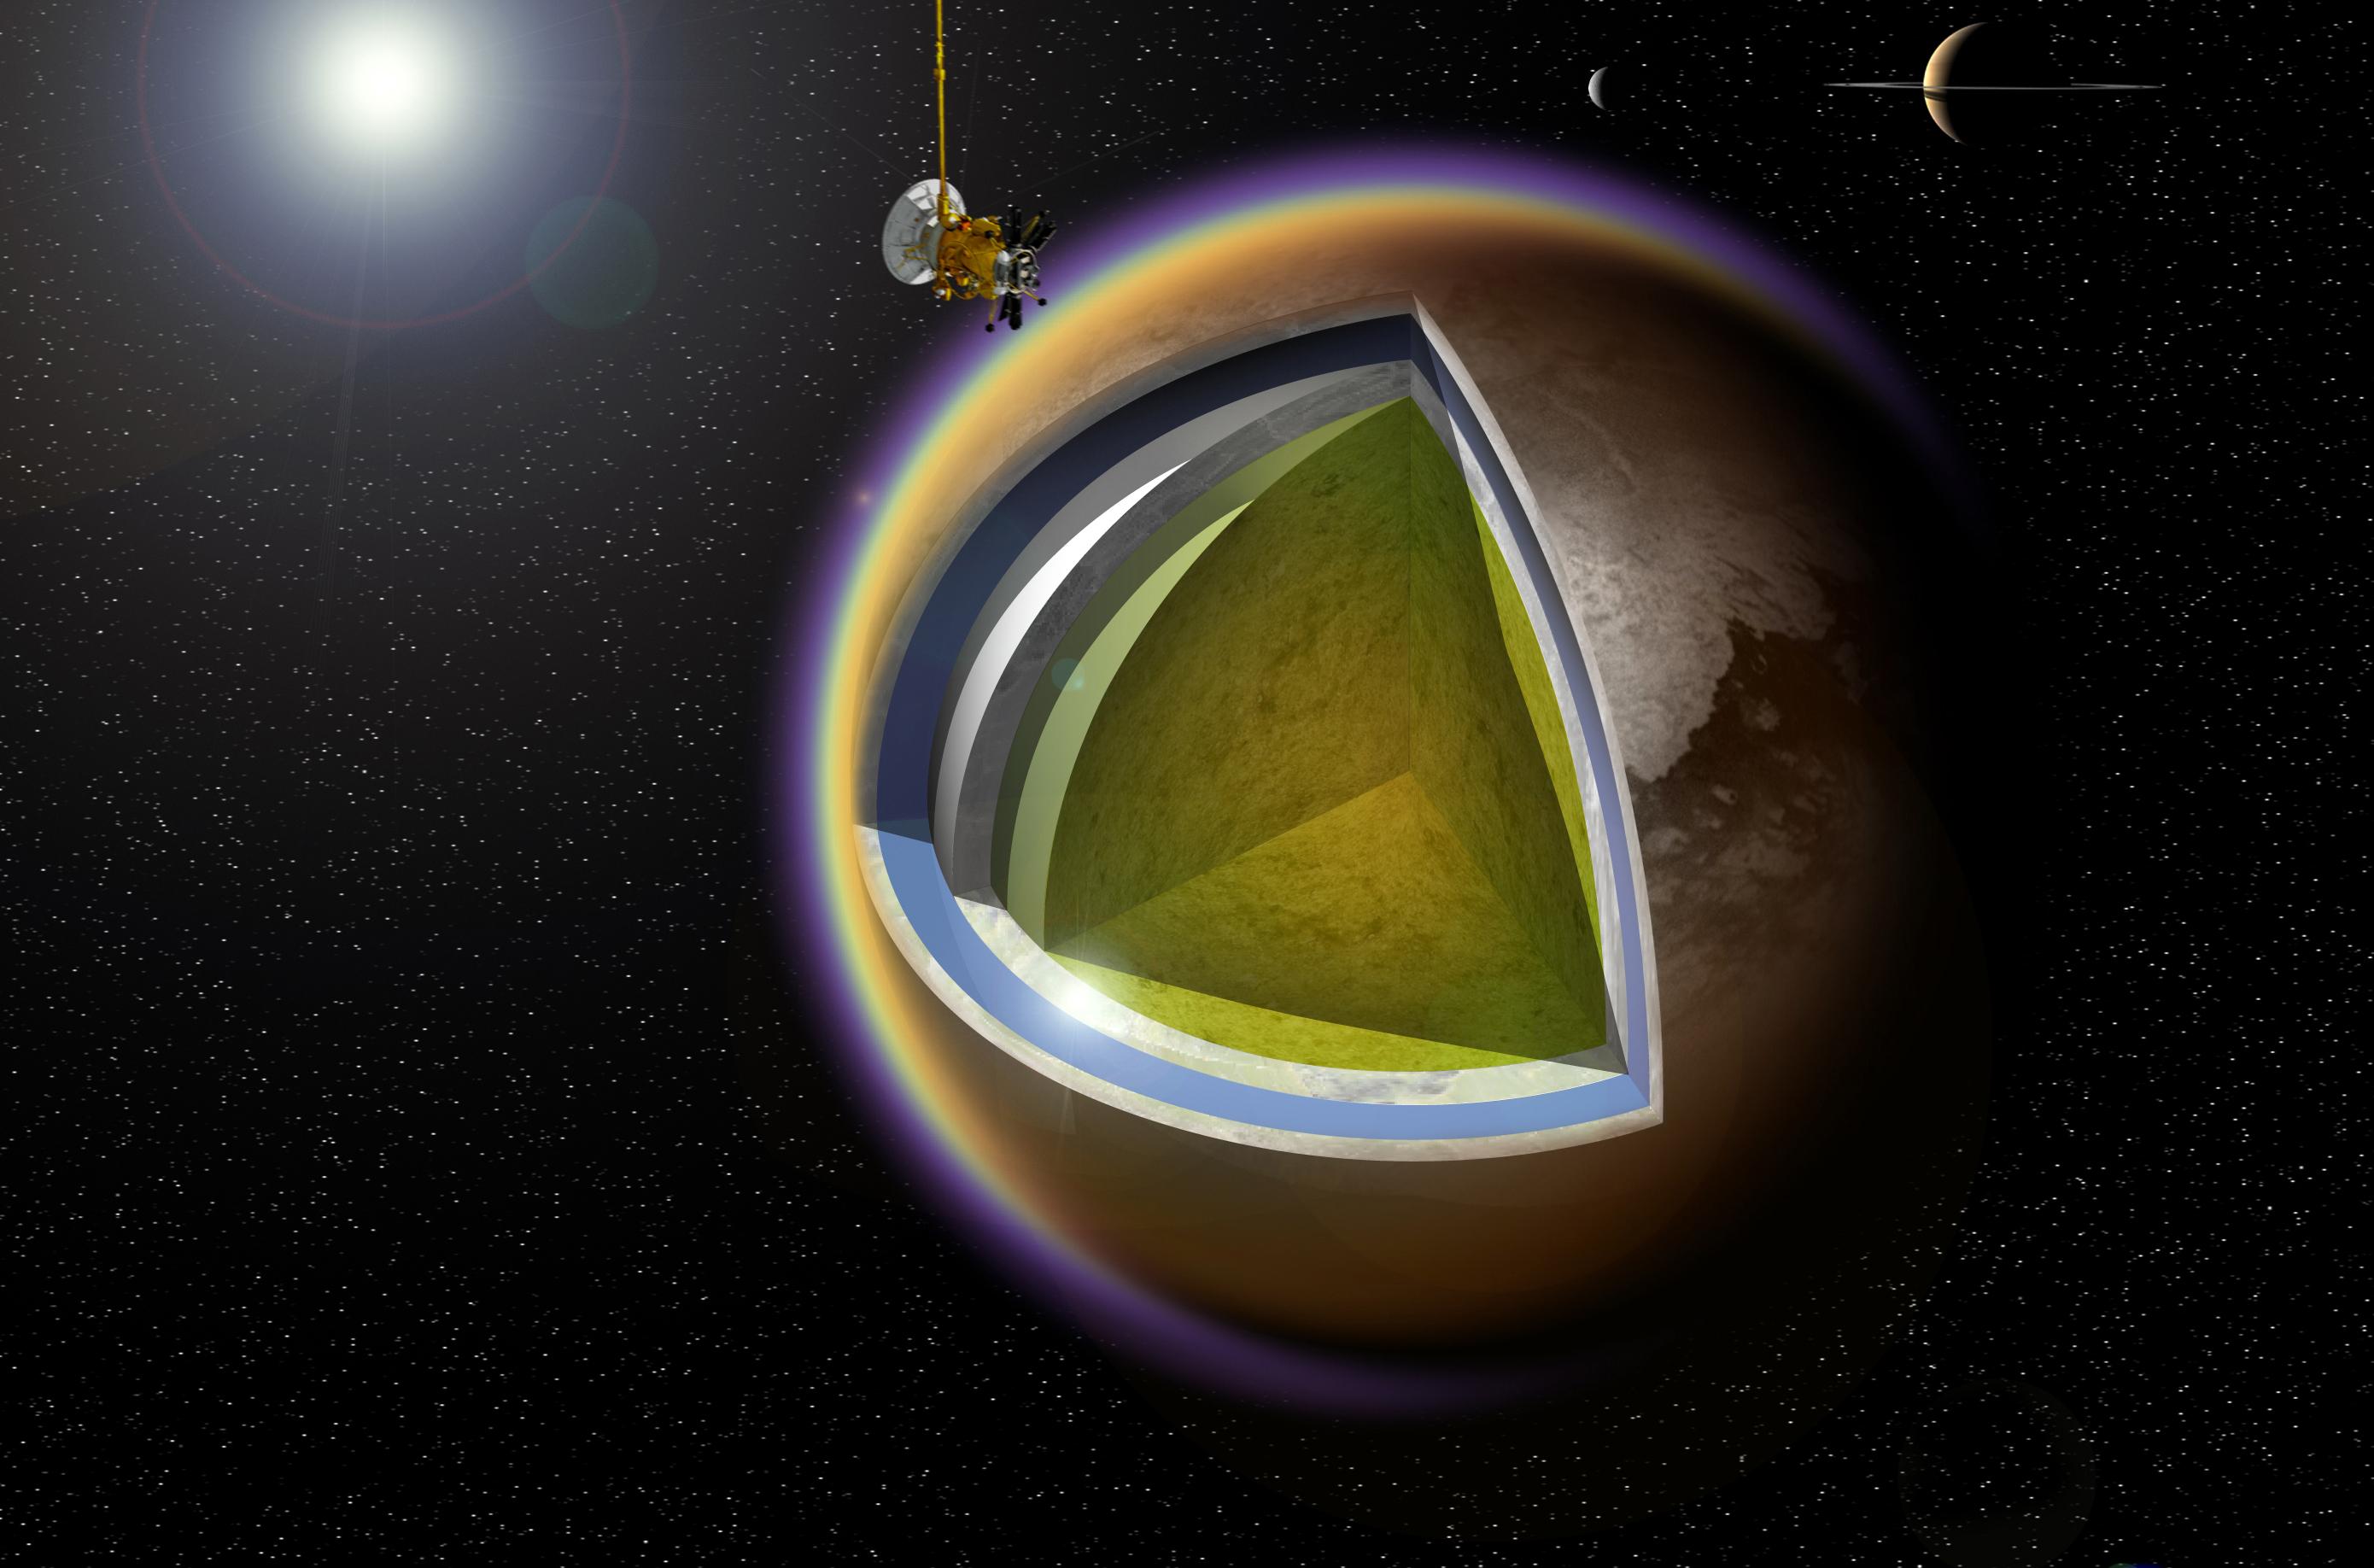 Illustration showing internal structure of Titan